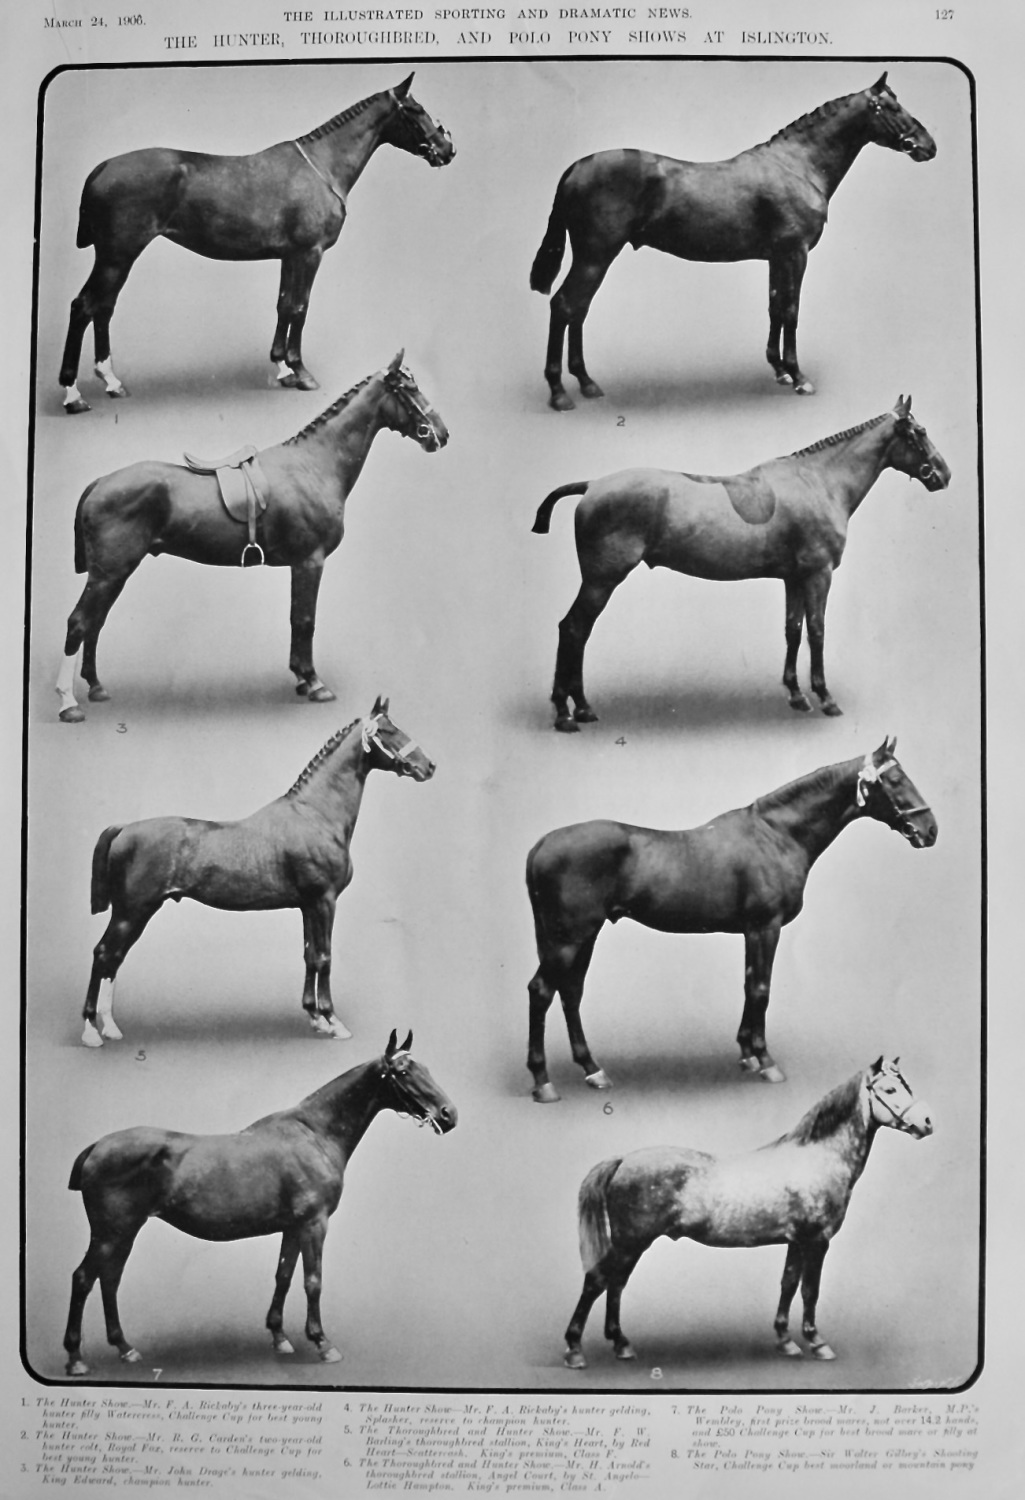 The Hunter, Thoroughbred, and Polo Pony Shows at Islington.  1906.